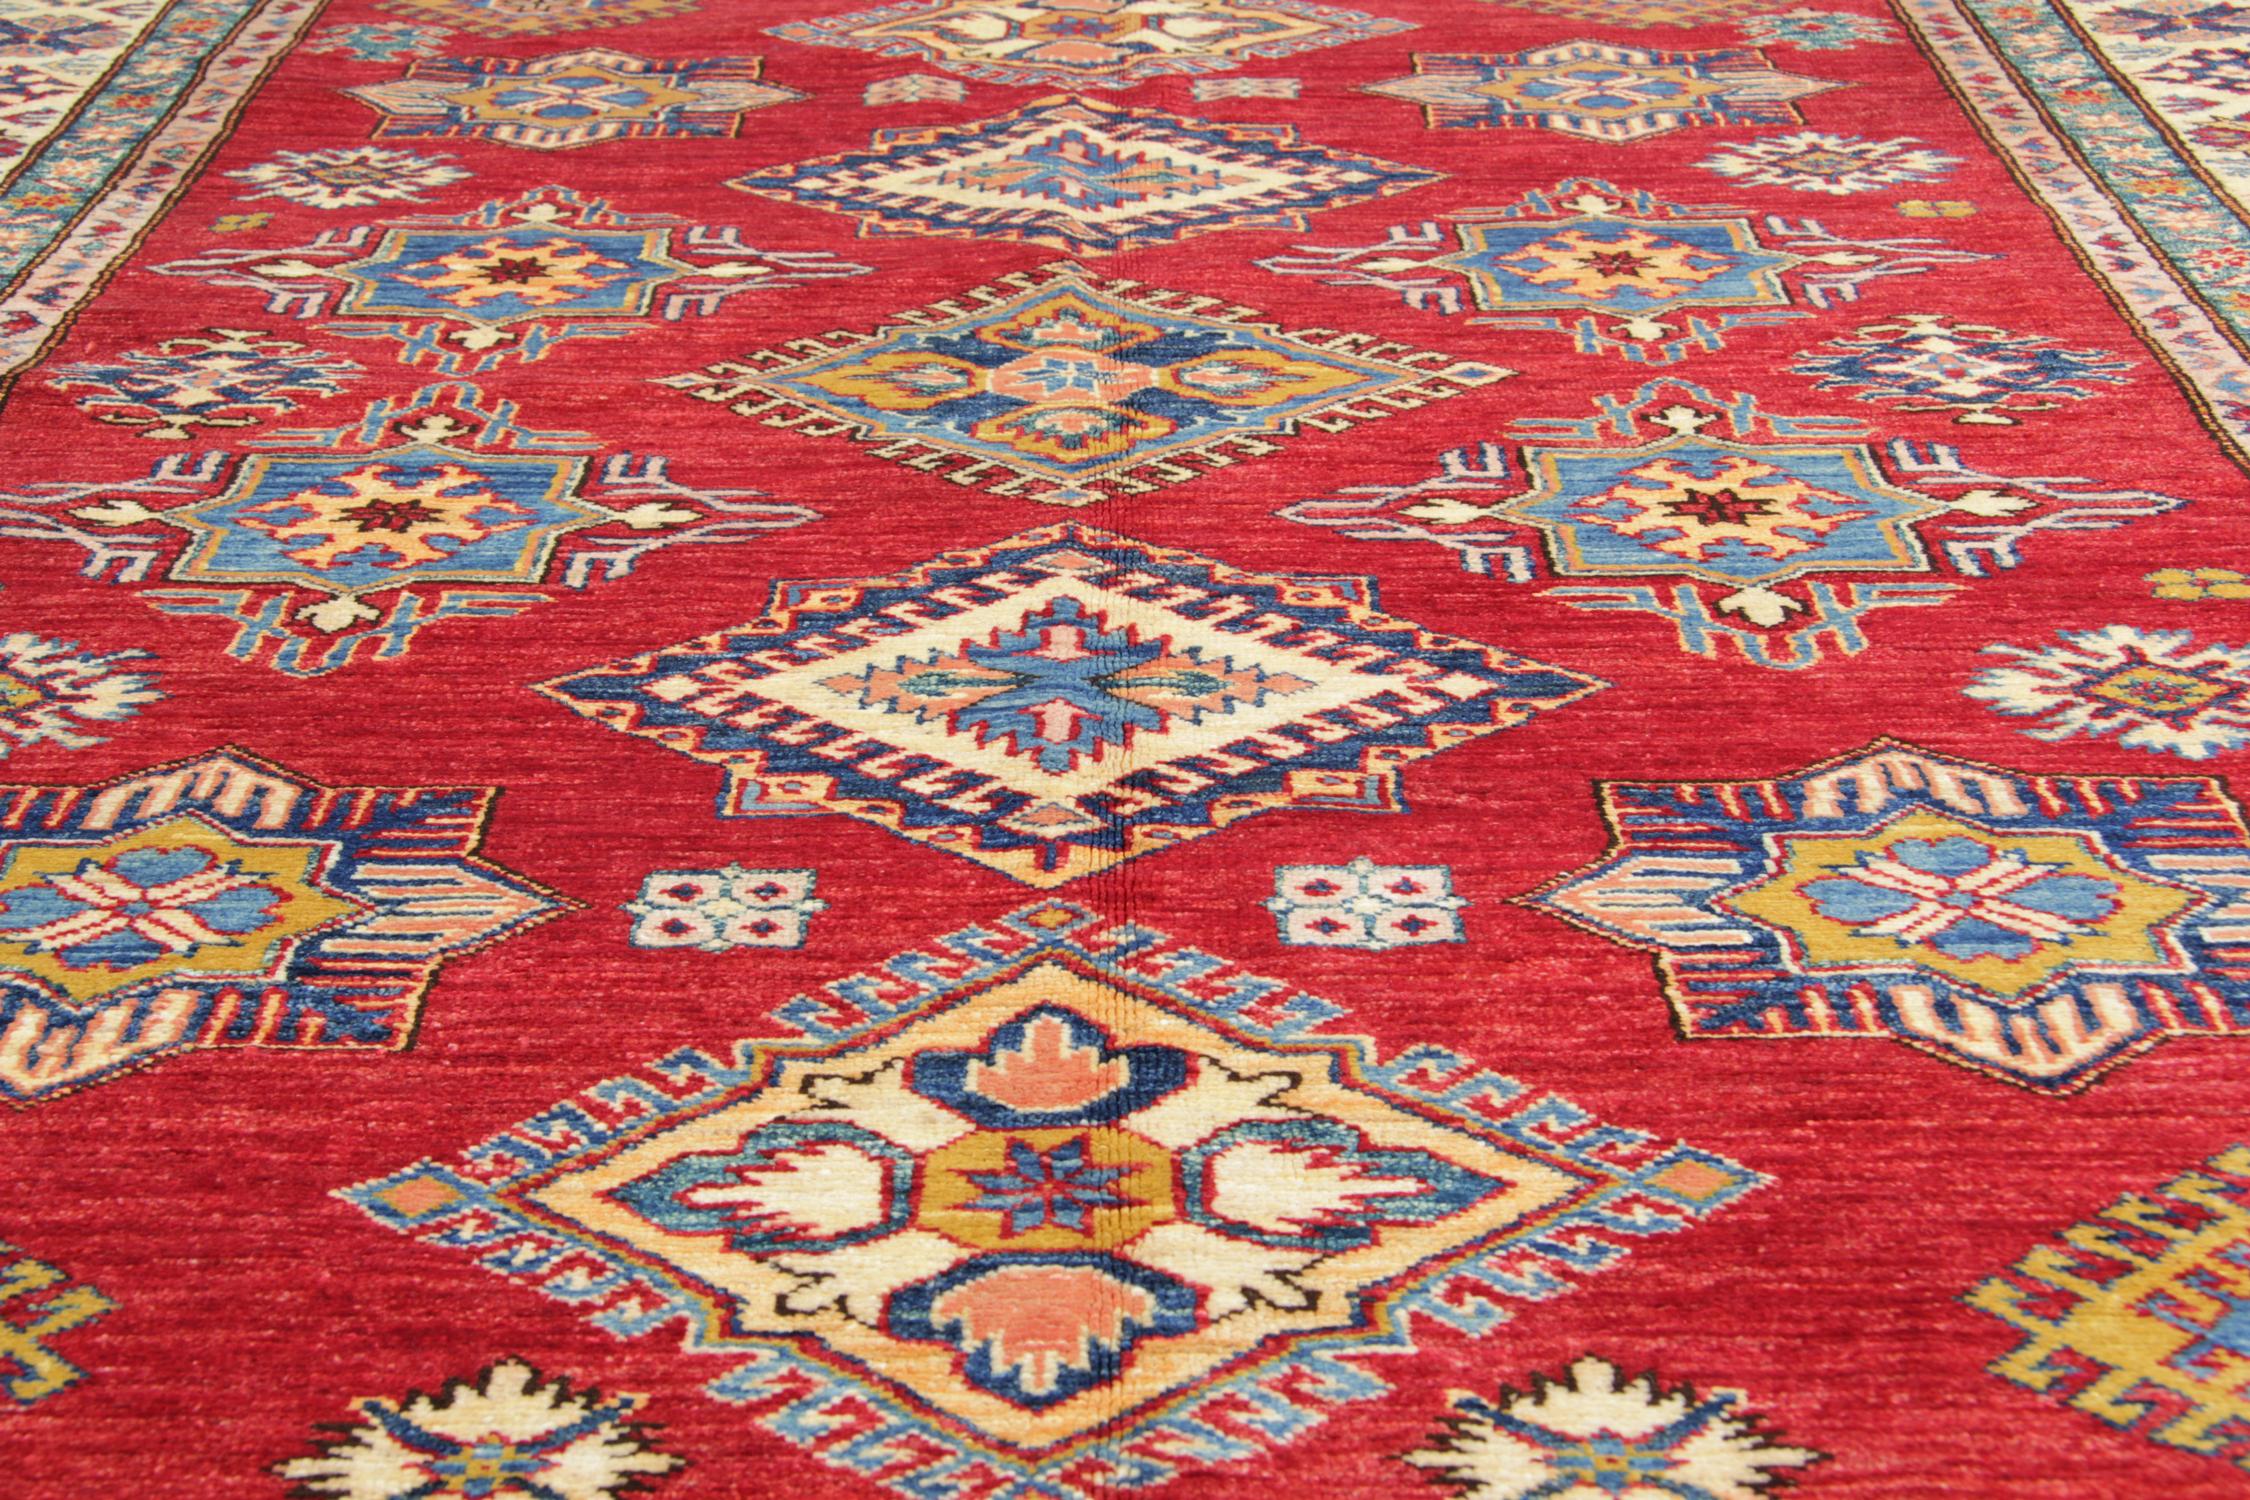 Hand-Crafted Red Oriental Geometric Rugs, Handmade Carpet Ivory Rugs for Sale For Sale